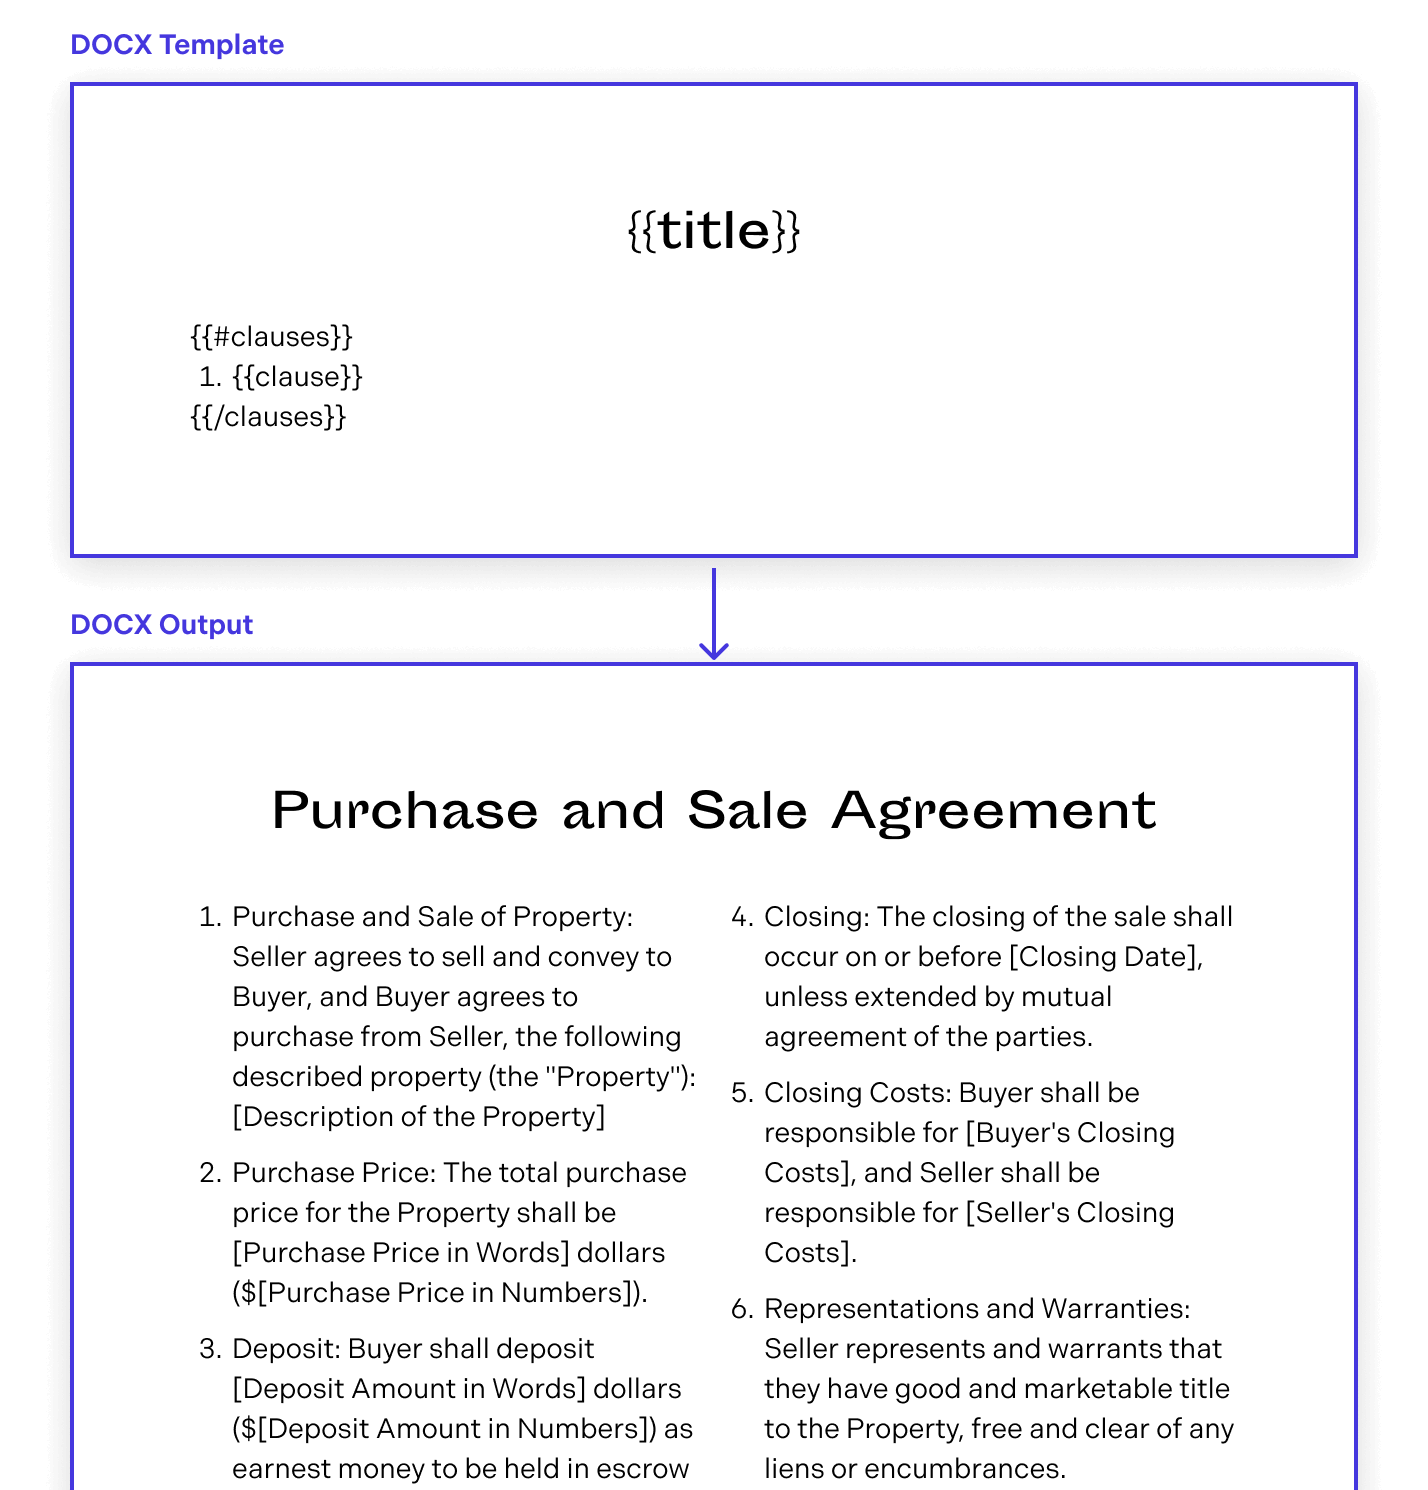 Word Template with text reflowing